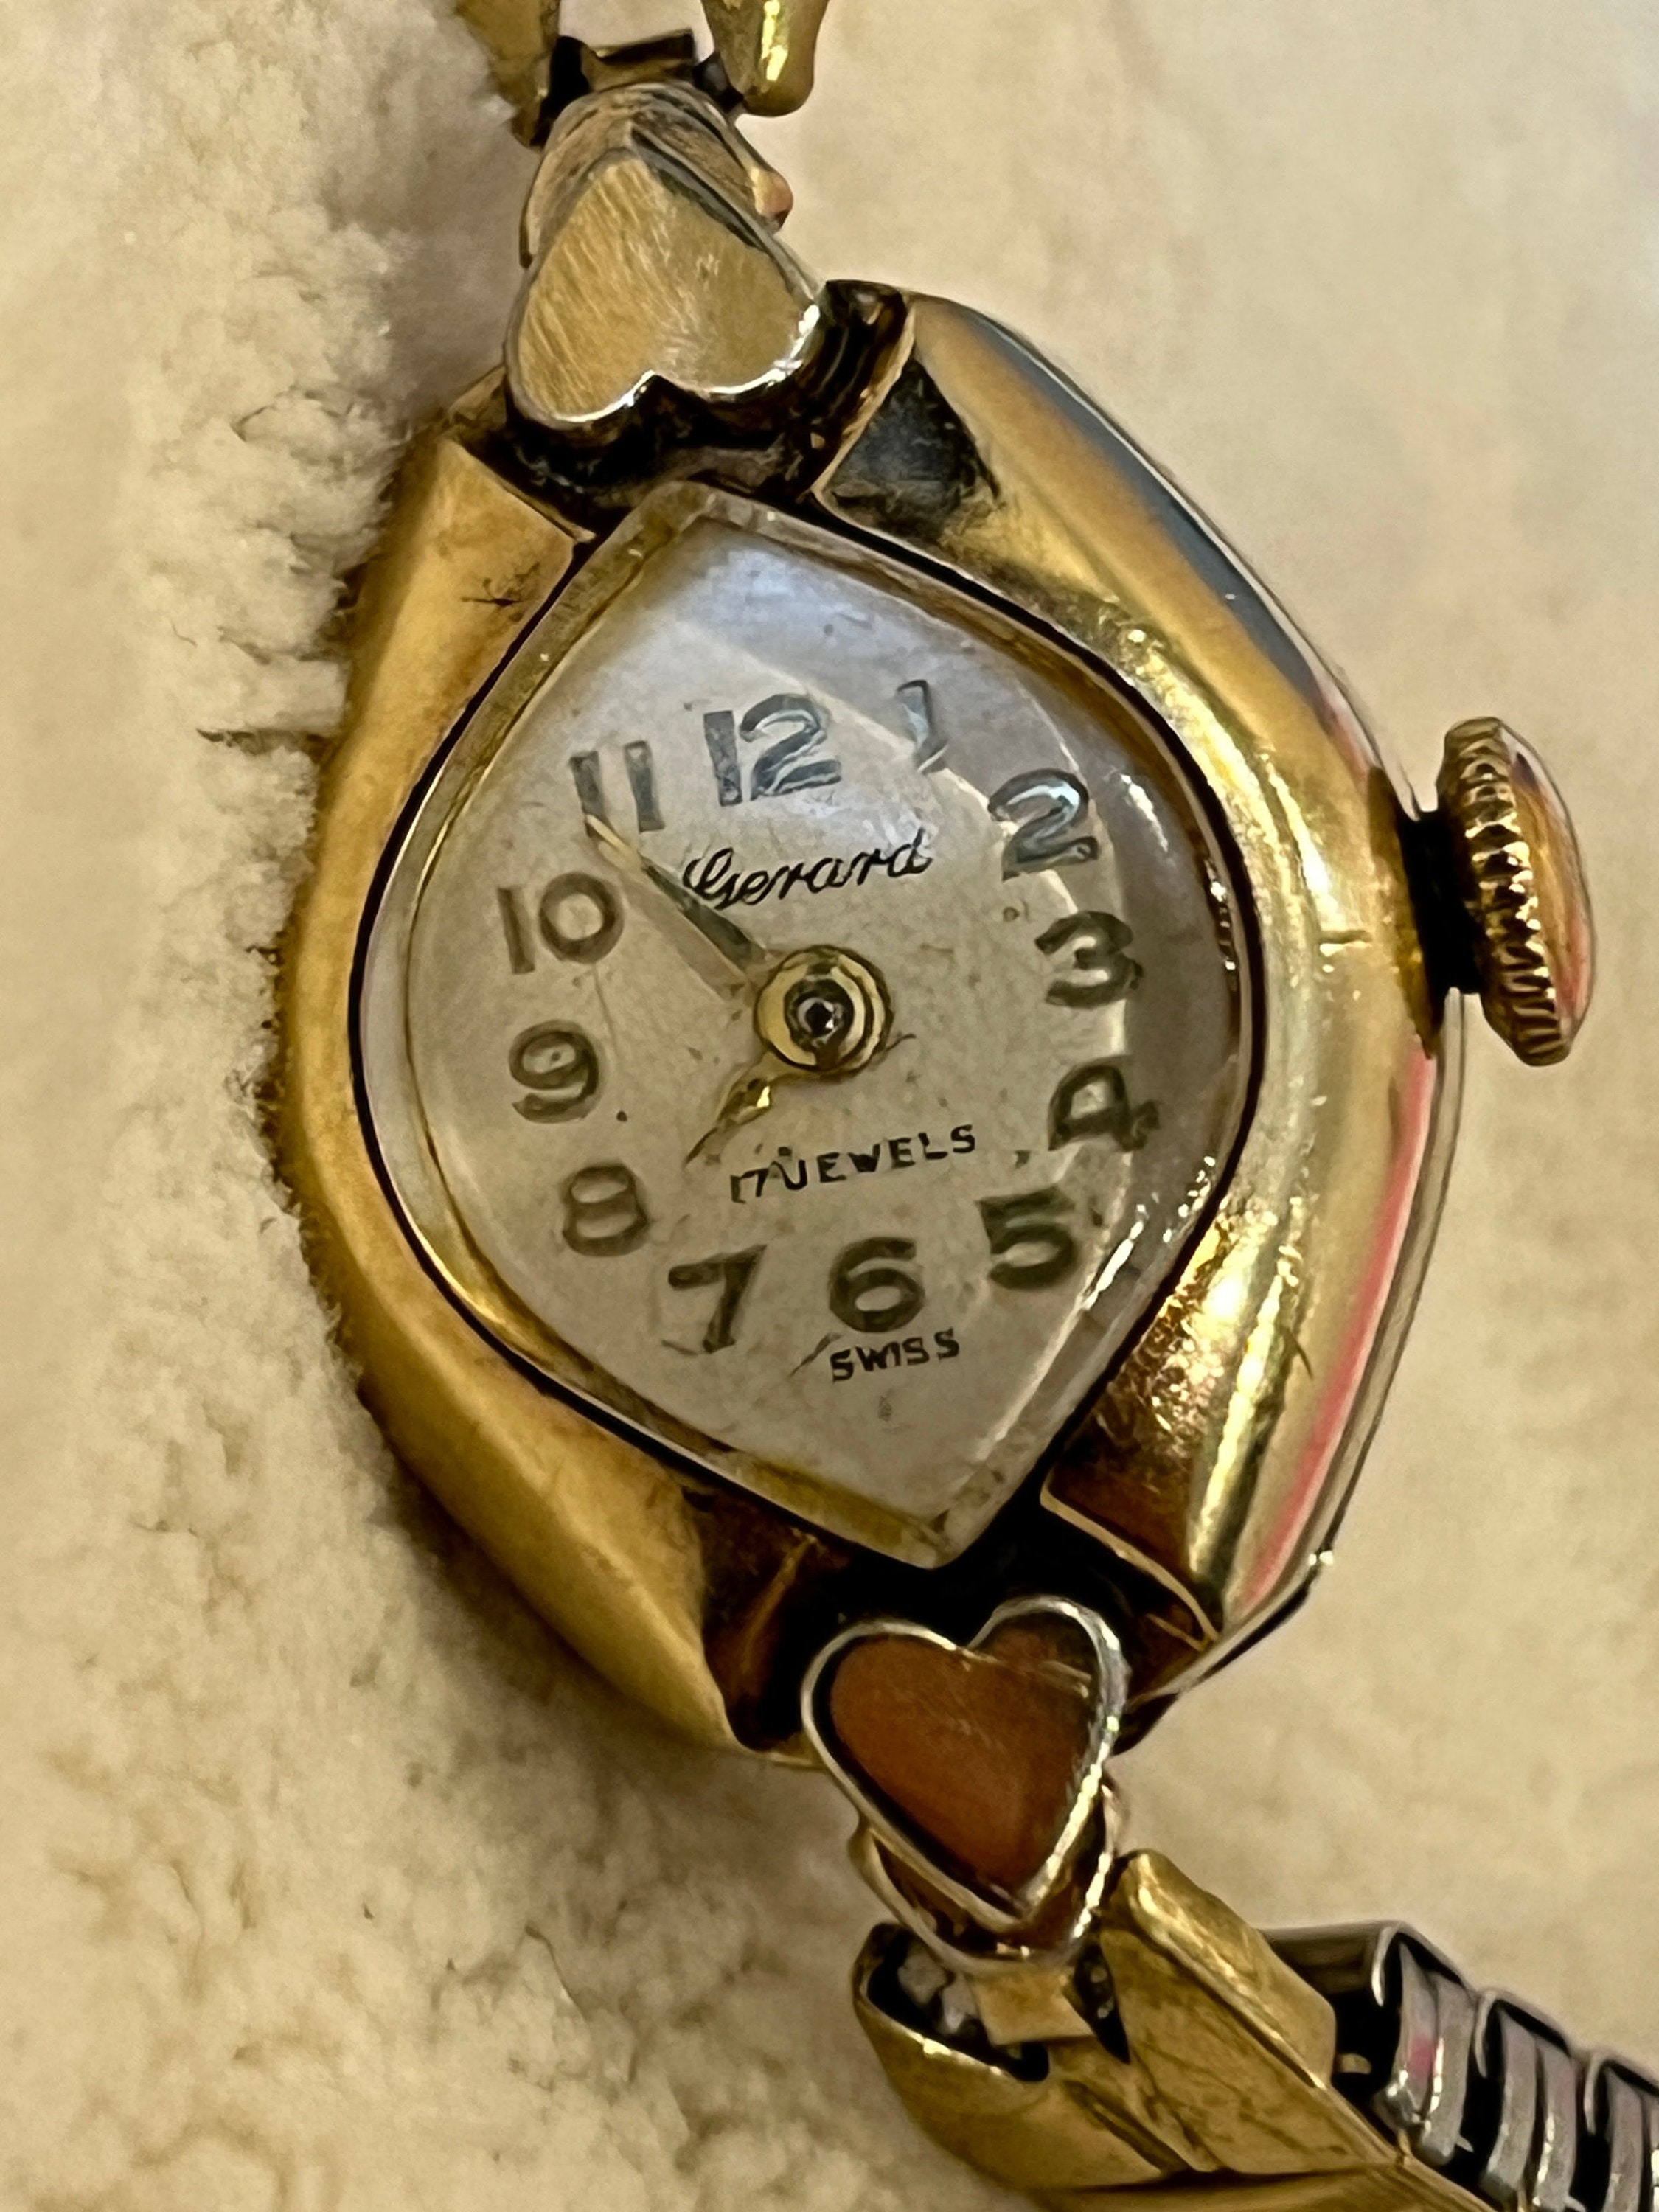 Lady de Luxe Vintage 17 Jewels Swiss-made Mechanical Watch for